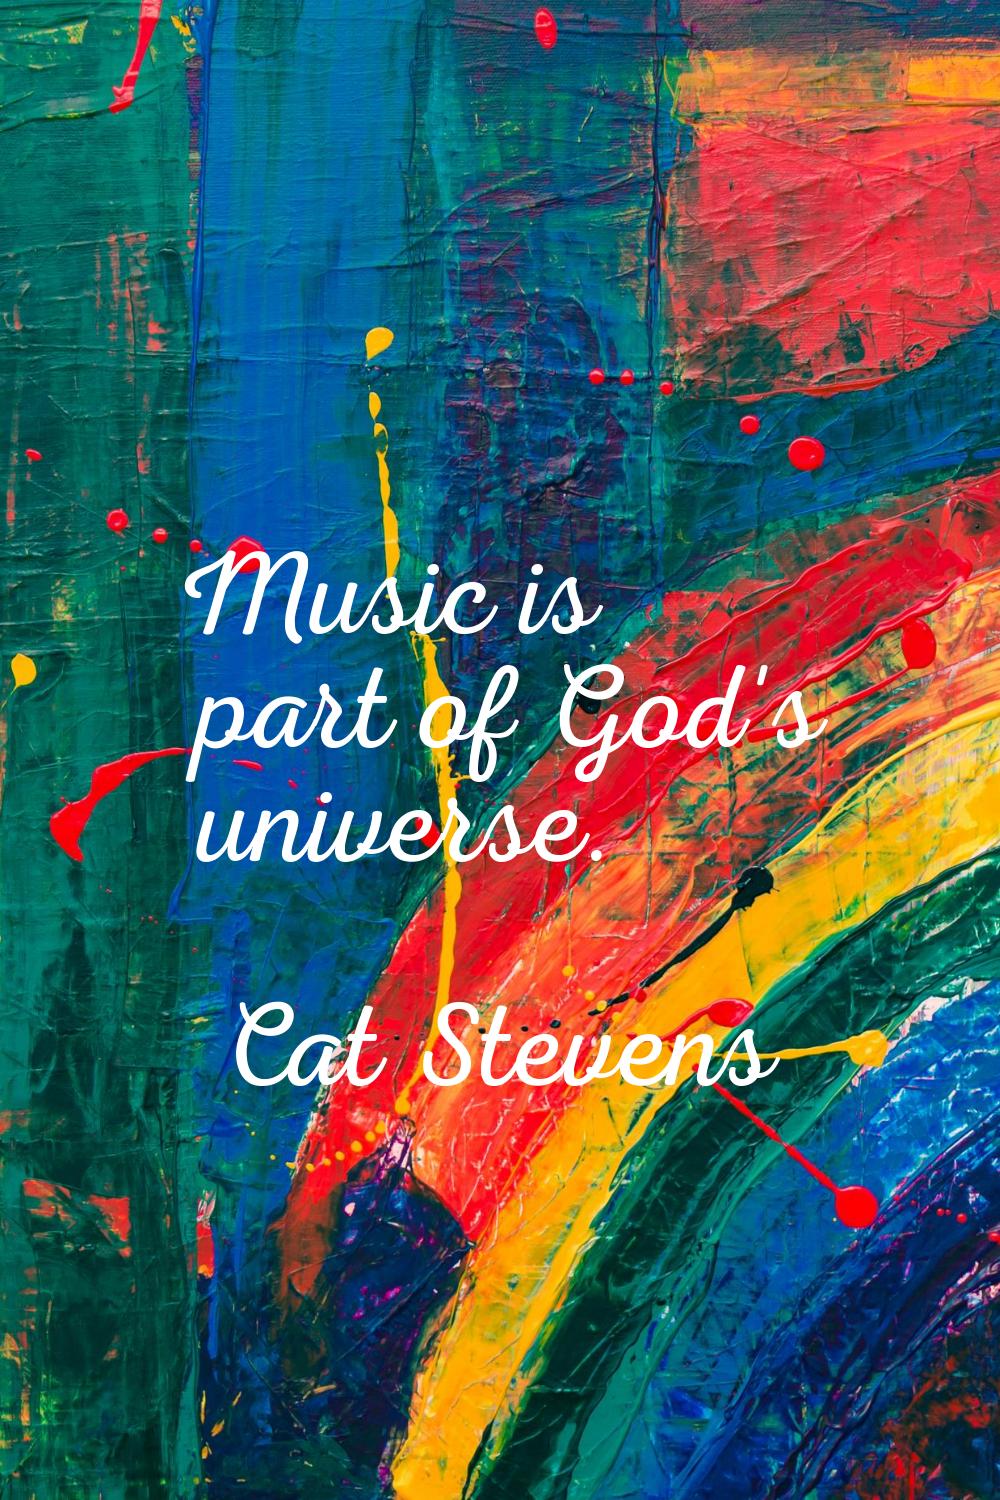 Music is part of God's universe.